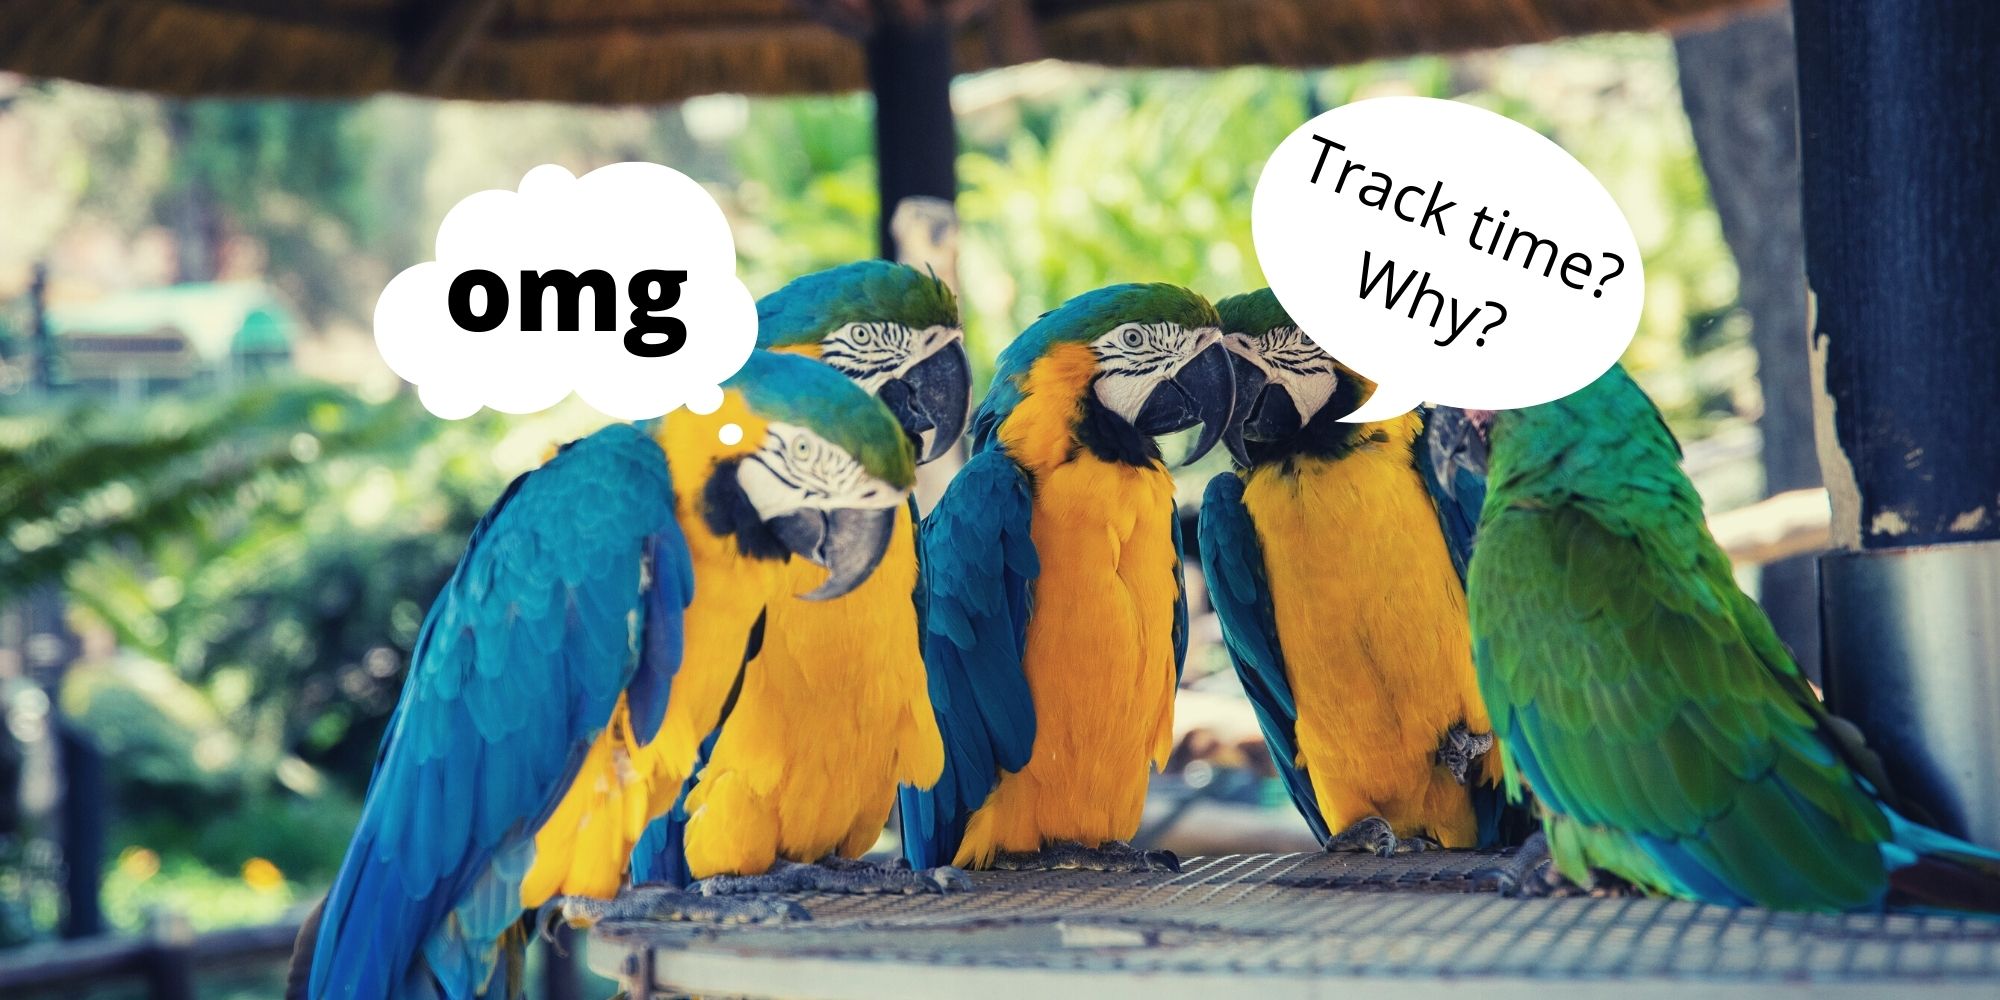 Parrots discussing time tracking